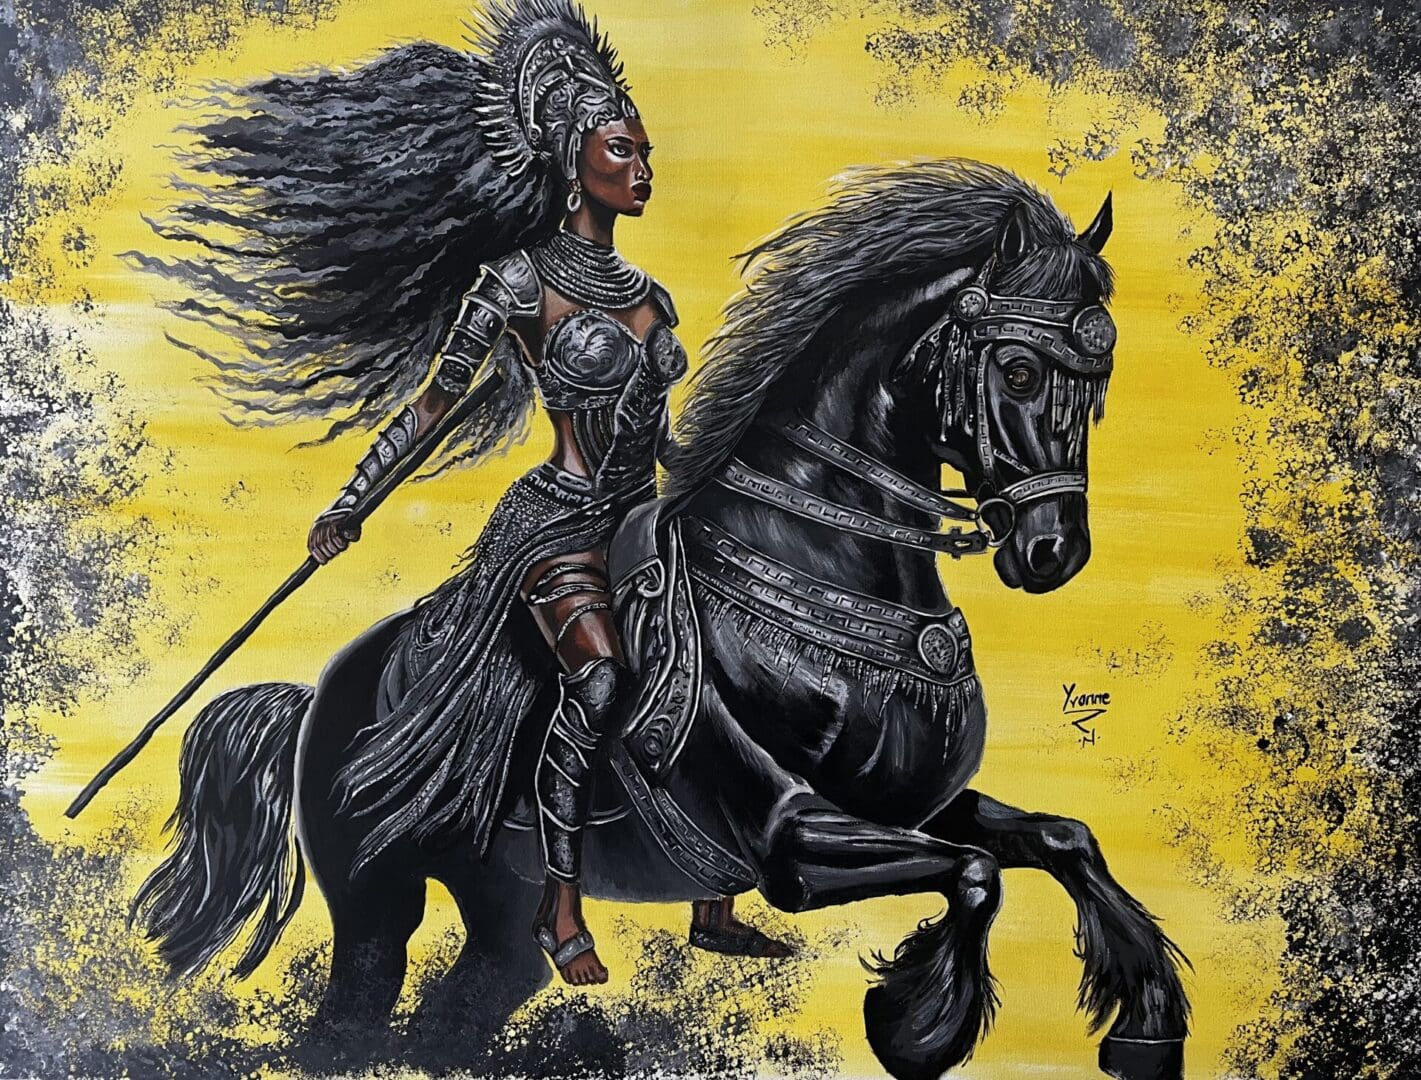 A painting of a woman riding on the back of a black horse.